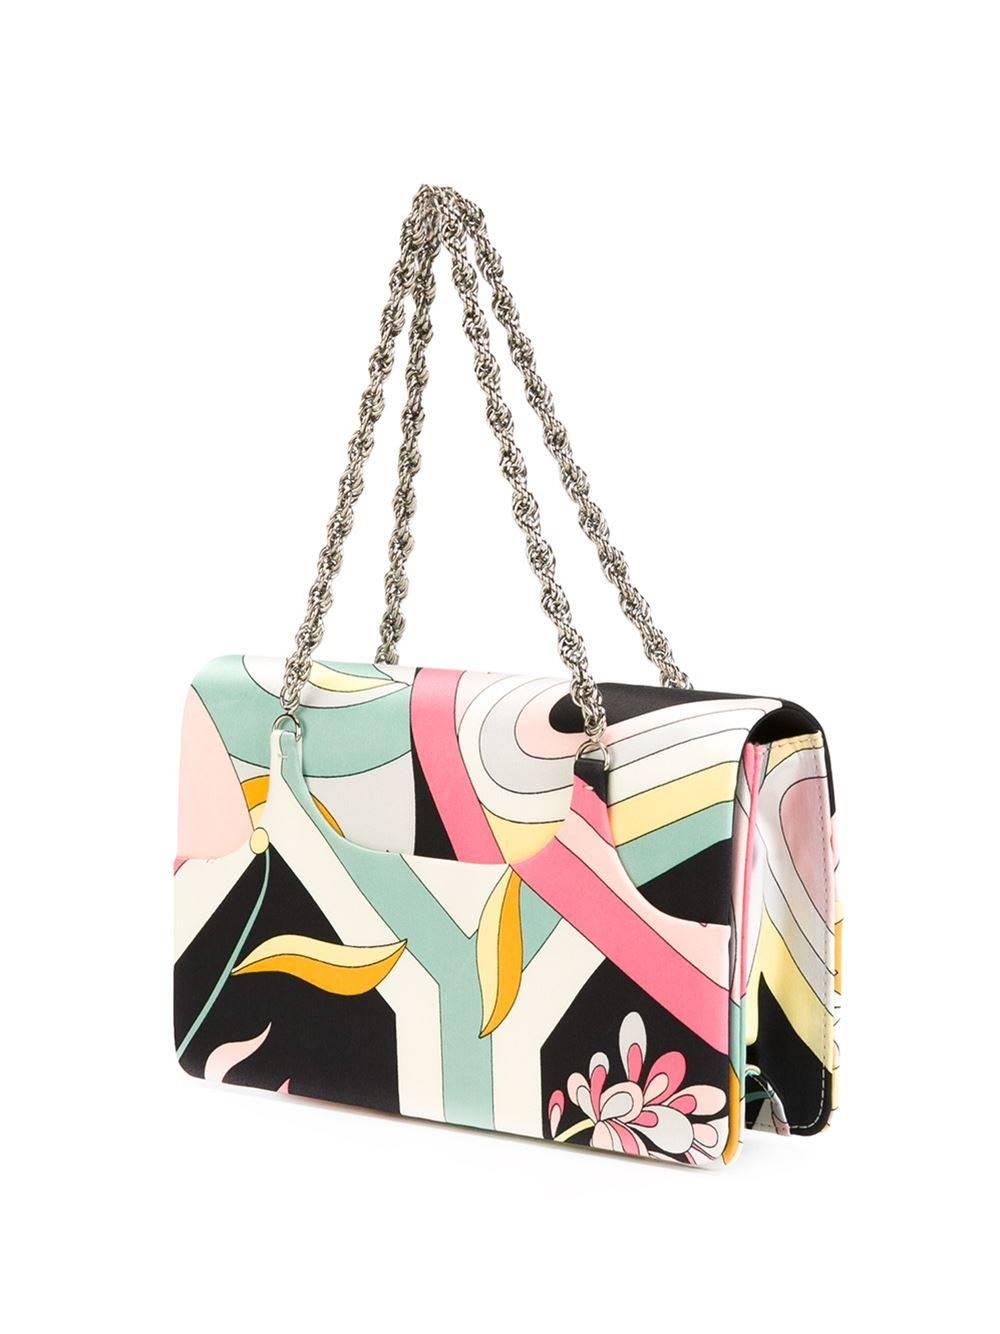 Multicoloured silk printed clutch featuring a foldover top, a chain strap and an internal logo patch.

Colour: Multi

Material: Silk 100%

Measurements: W: 23cm, H: 14cm, D: 5cm, Handle: 15cm

Condition: 8.5 out of 10
Very Good